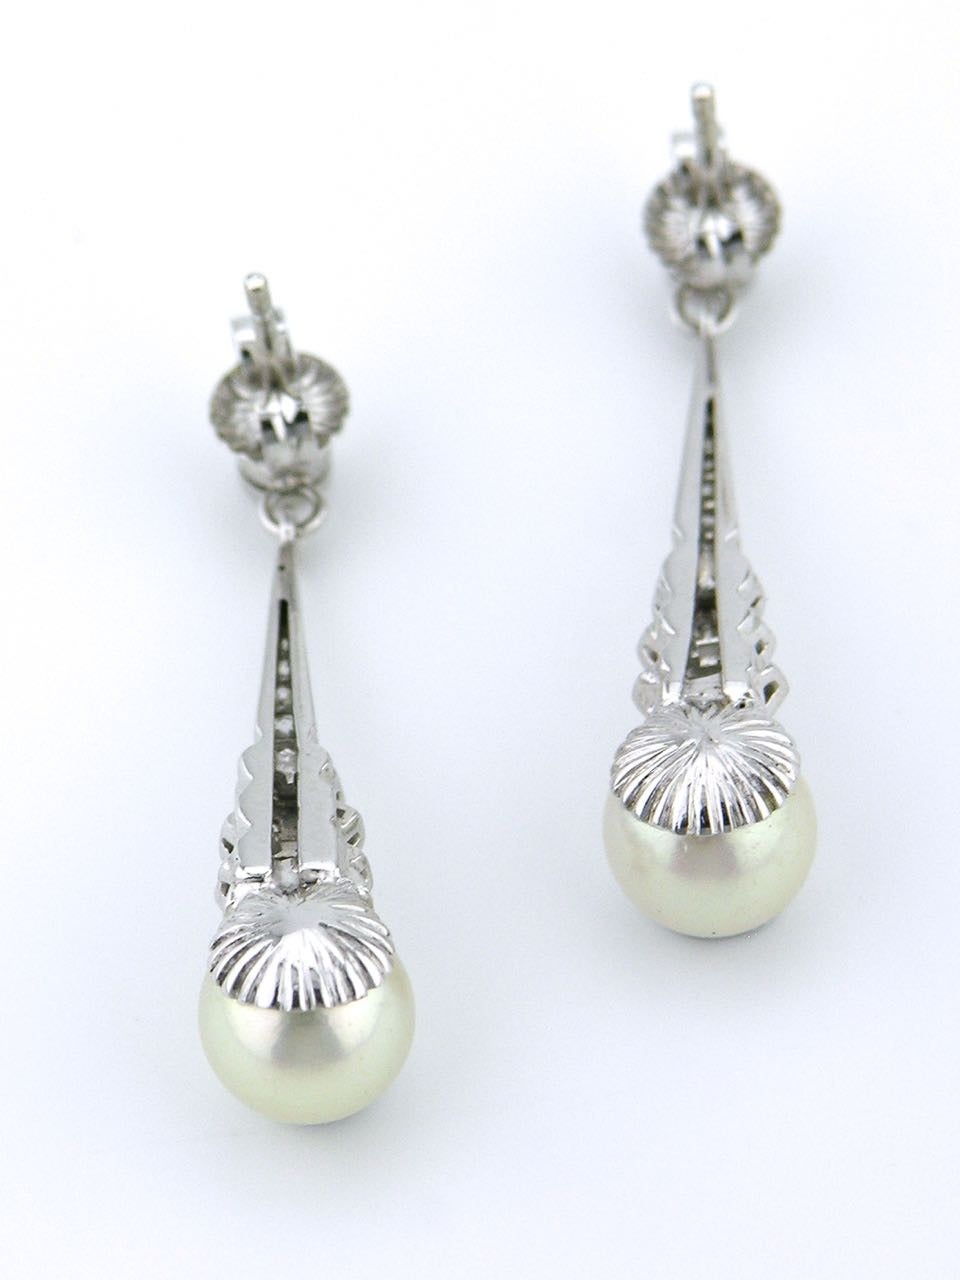 A pair of white gold pearl and diamond drop earrings - each earring consisting of a bezel set old cut diamond above 14 single cut diamonds above an 8mm cultured pearl set in 18k white gold

- total weight of diamonds 30 = 0.50ct G-H/VS-SI  
-